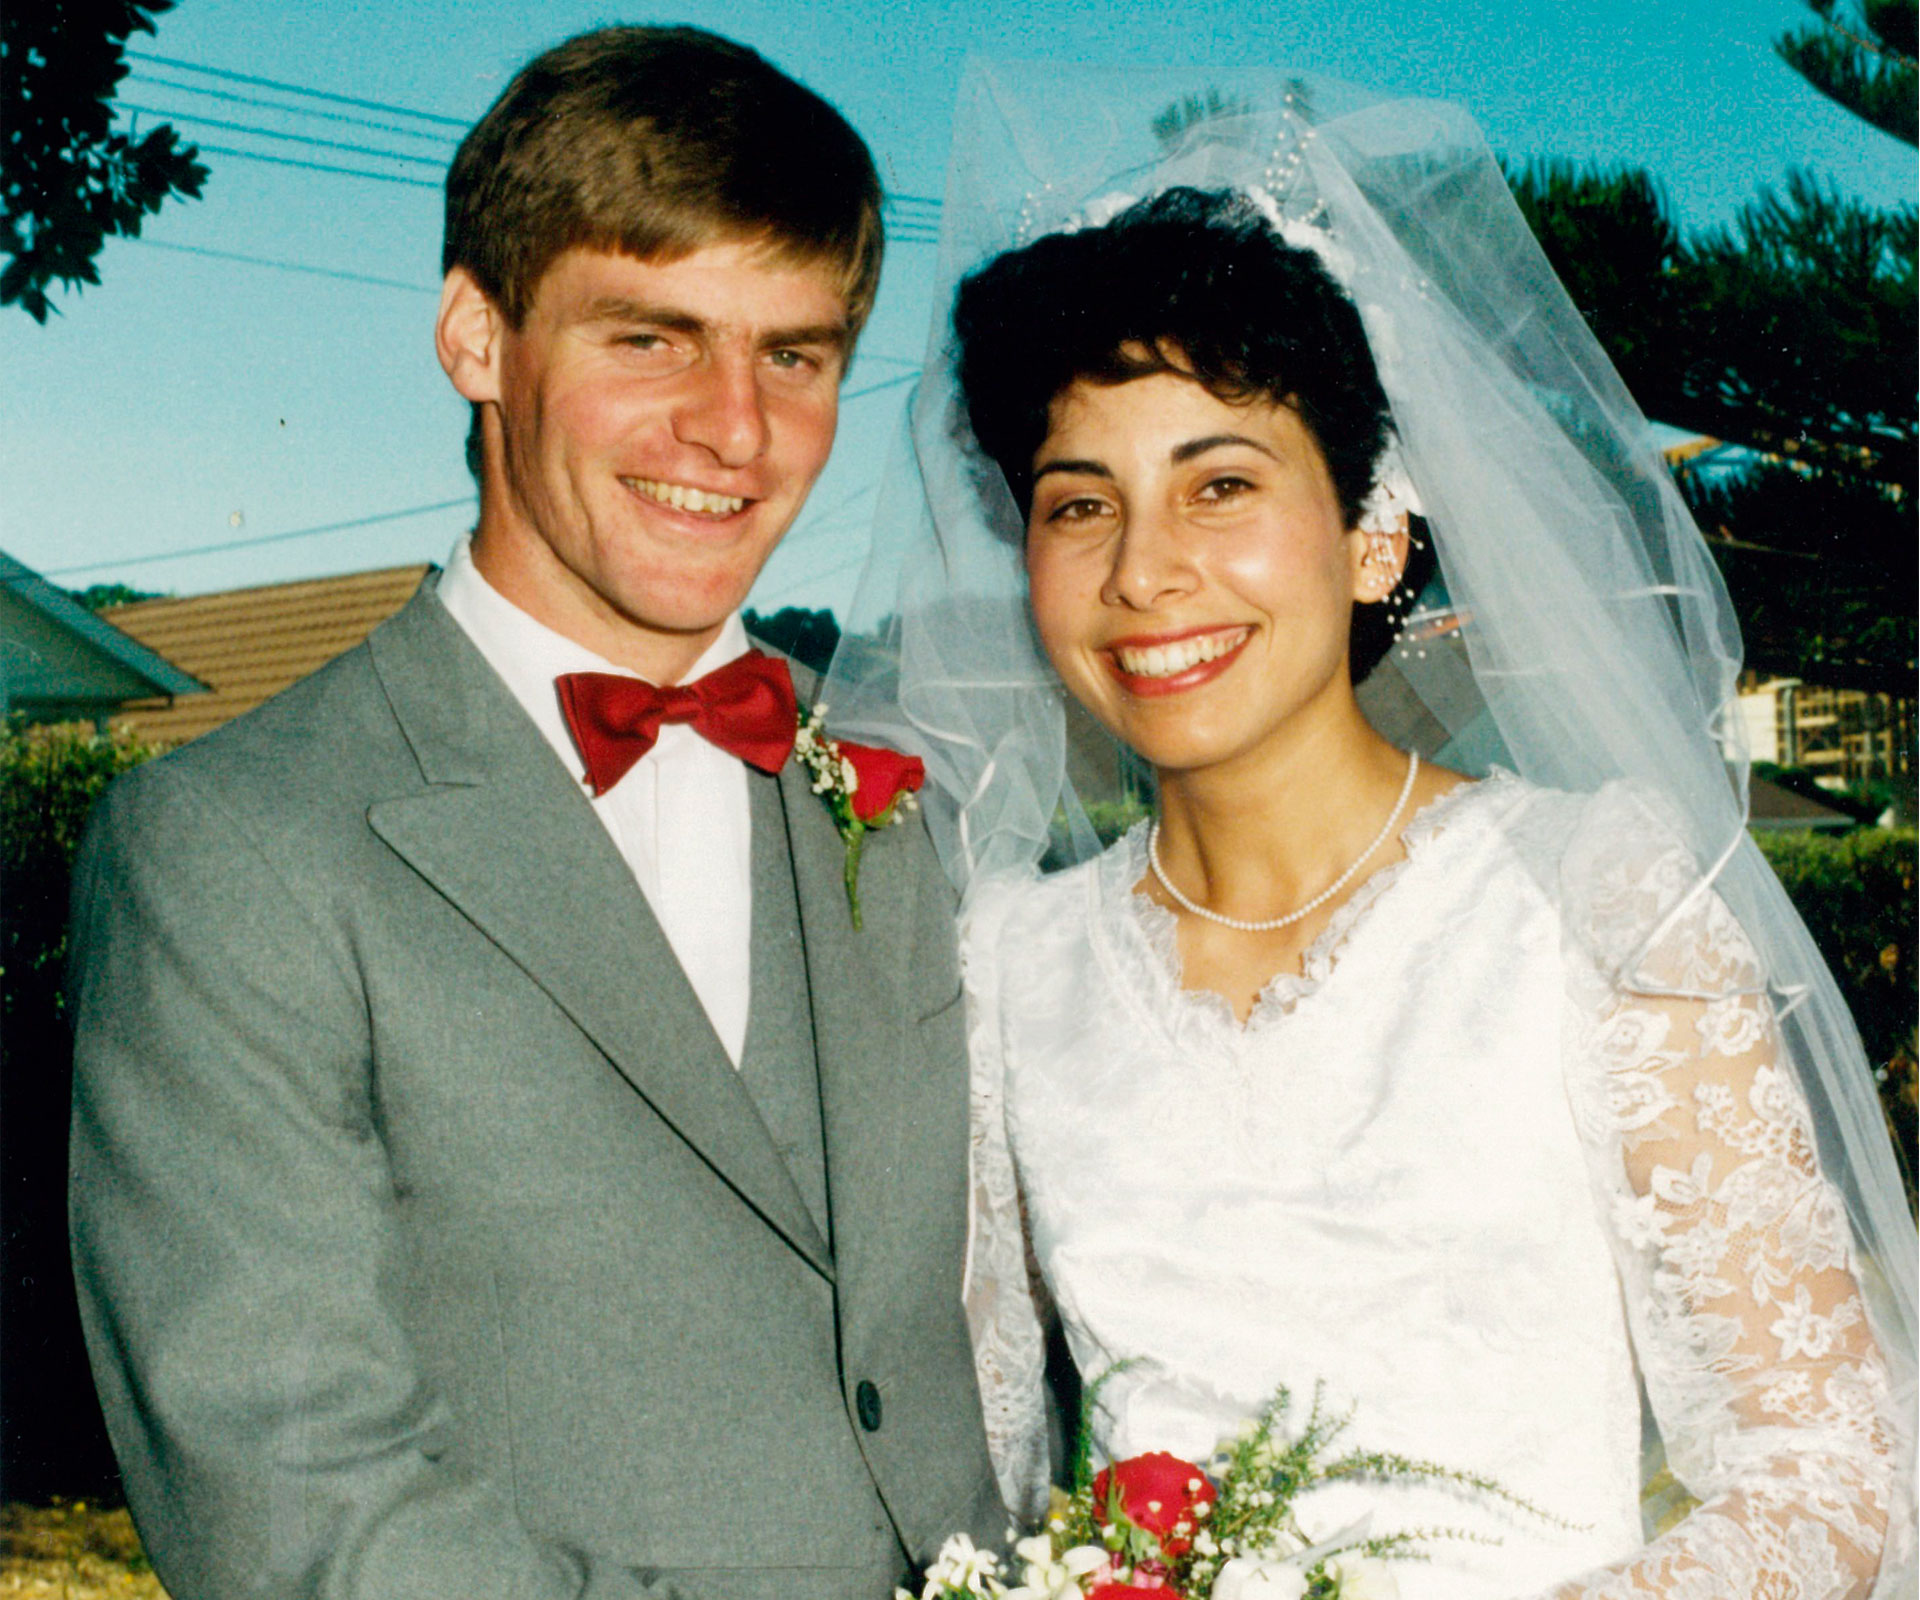 Mary and Bill English’s love story in pictures